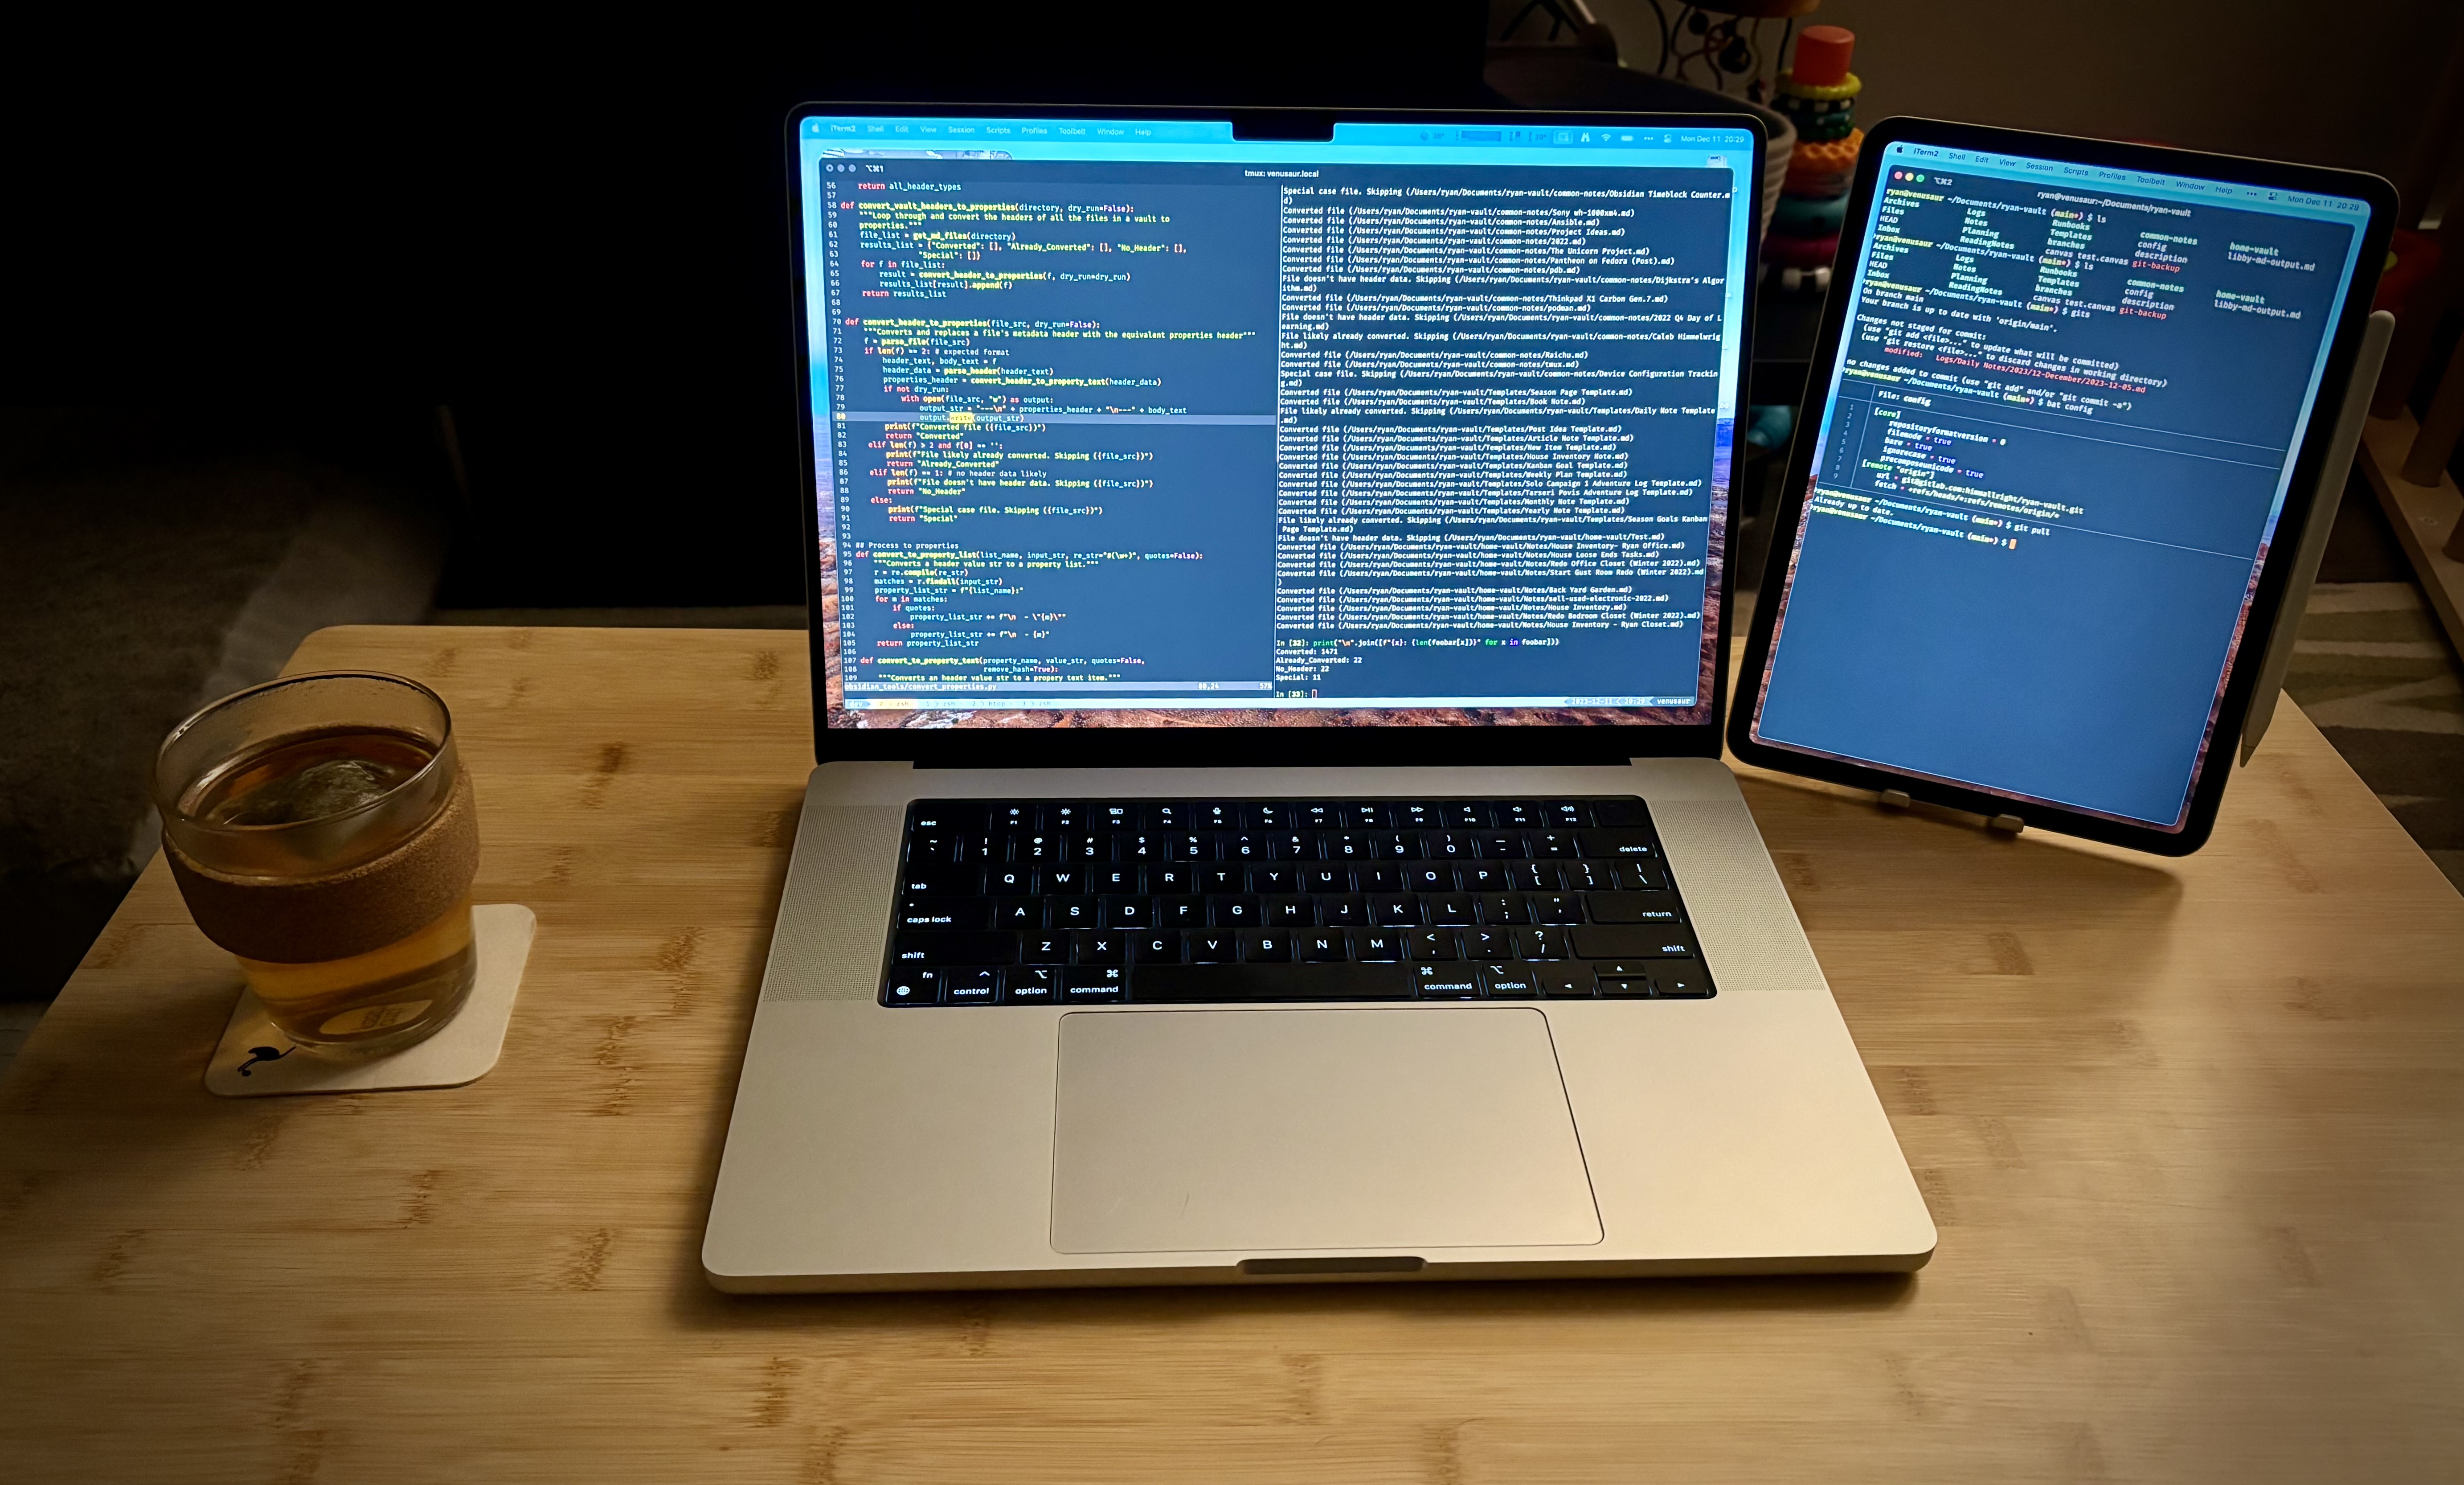 16\" M3 MBP setup on table with 11\" portrait iPad Pro next to it